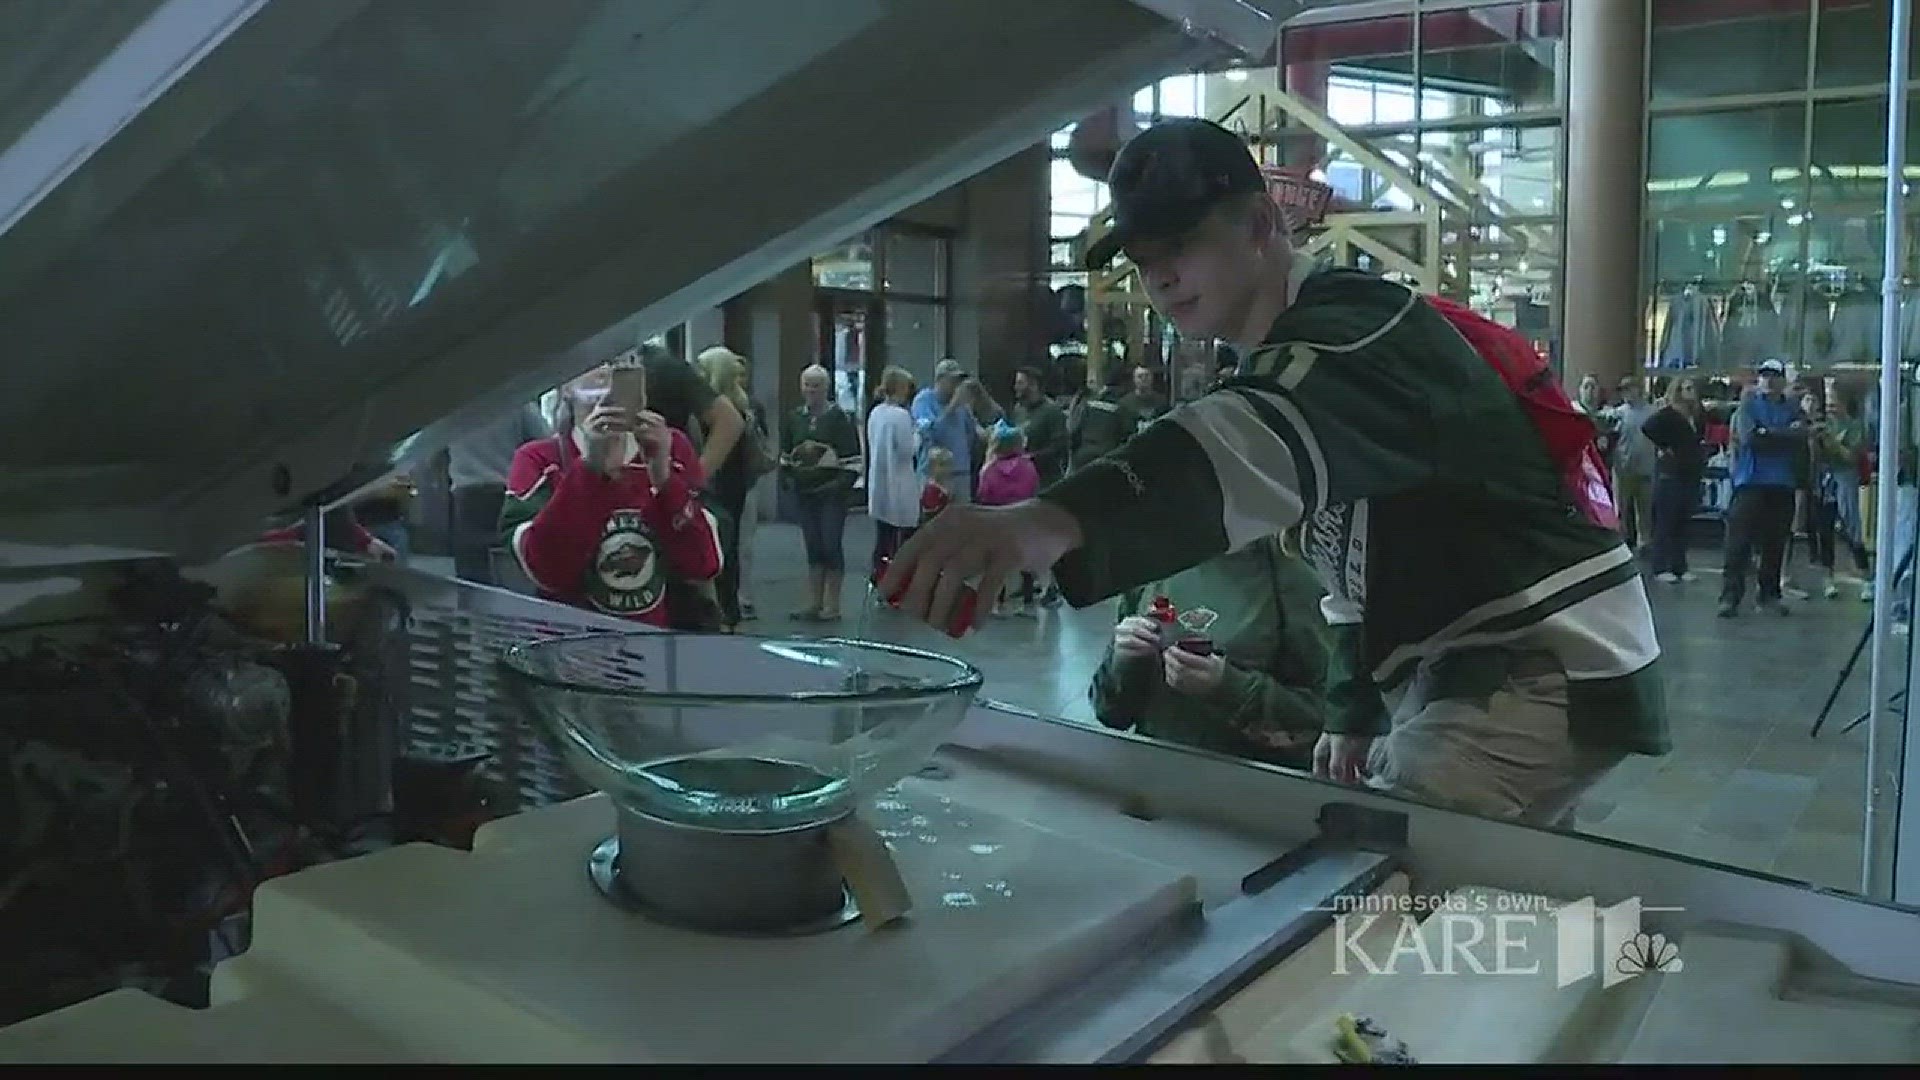 Minnesota Wild fans got the chance to support their team in a new way Saturday - by providing the very ice they'll skate on. http://kare11.tv/2x8EcZm